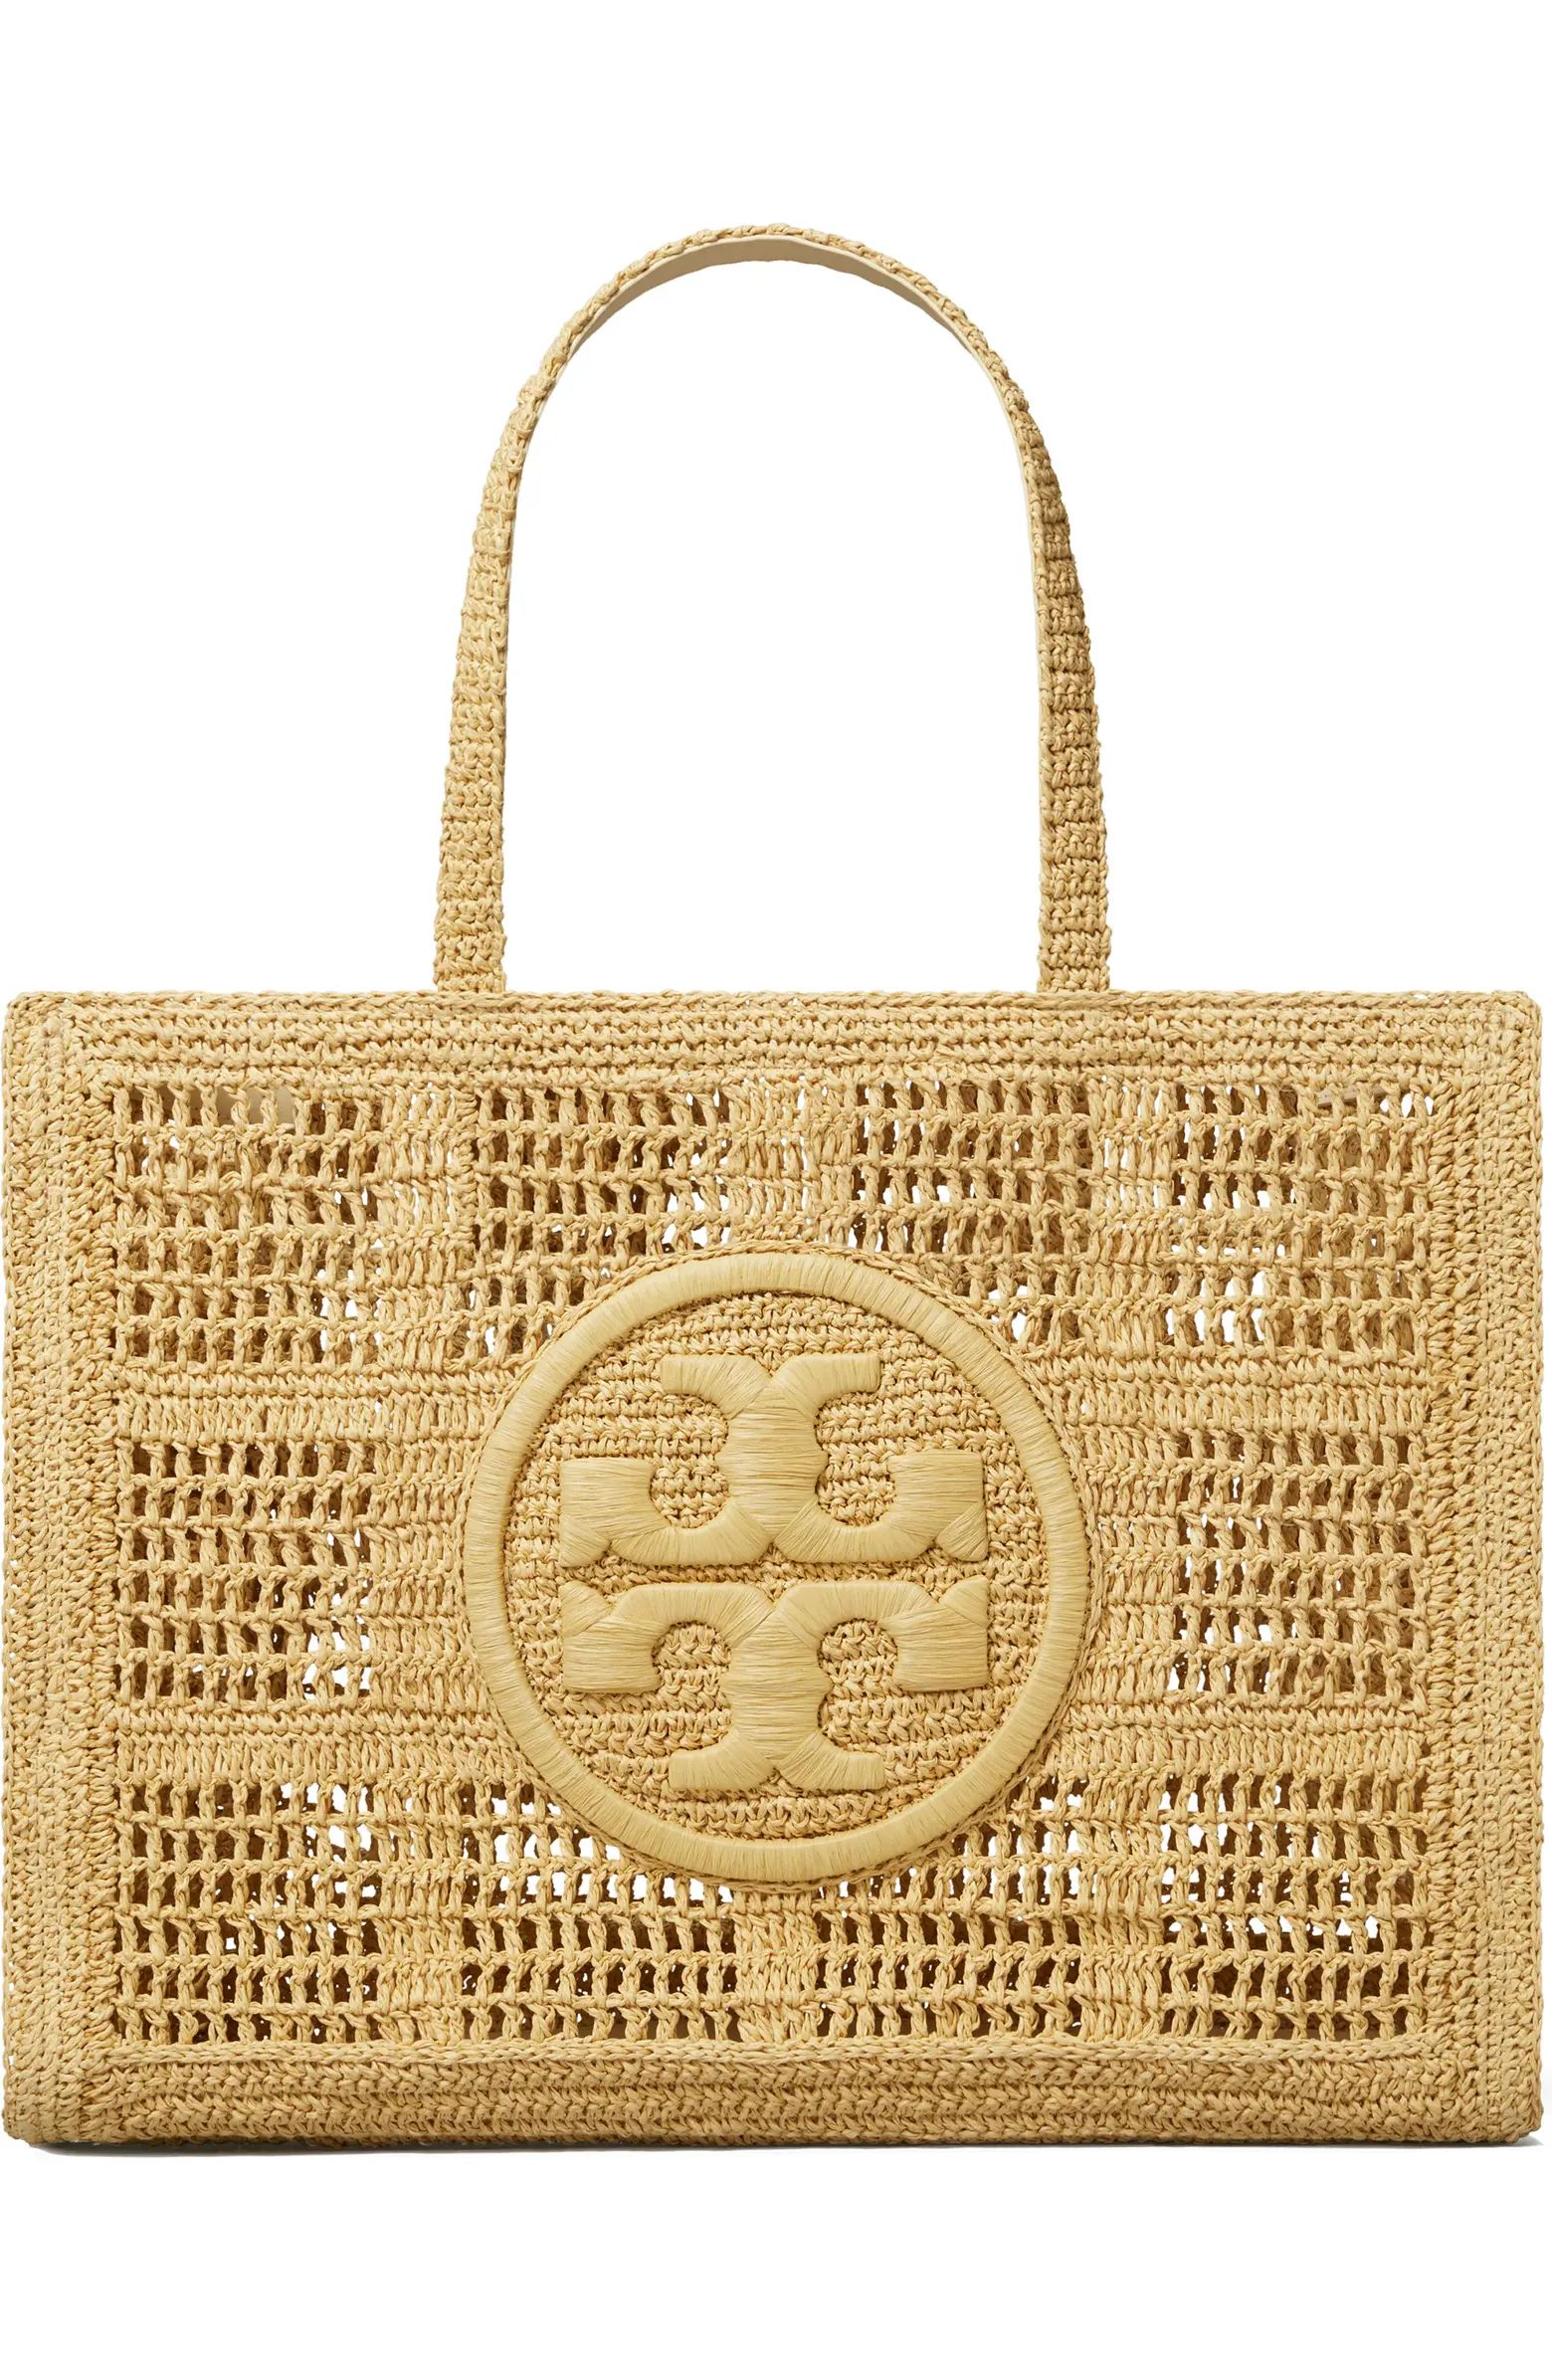 Tory Burch Ella Large Hand Crocheted Tote | Nordstrom | Nordstrom